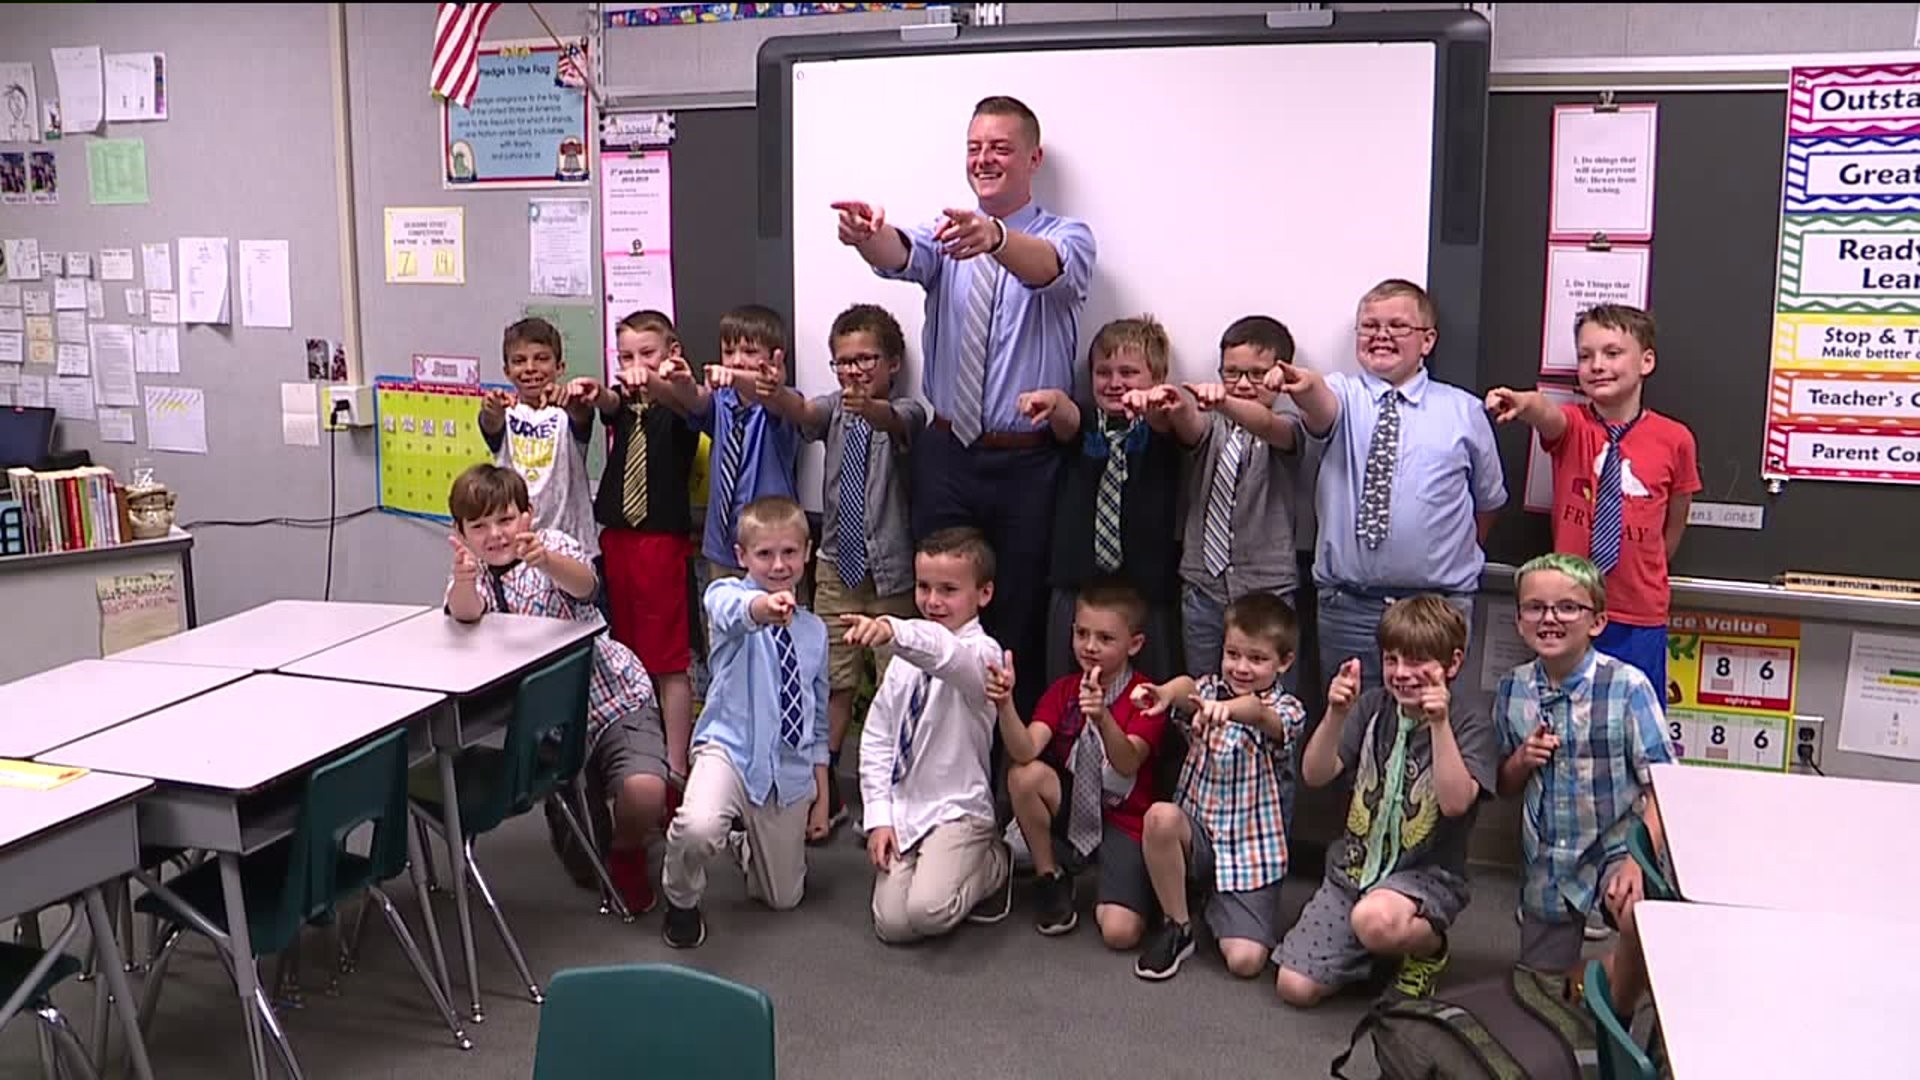 Teaching Proper Etiquette to Second Graders in Schuylkill County